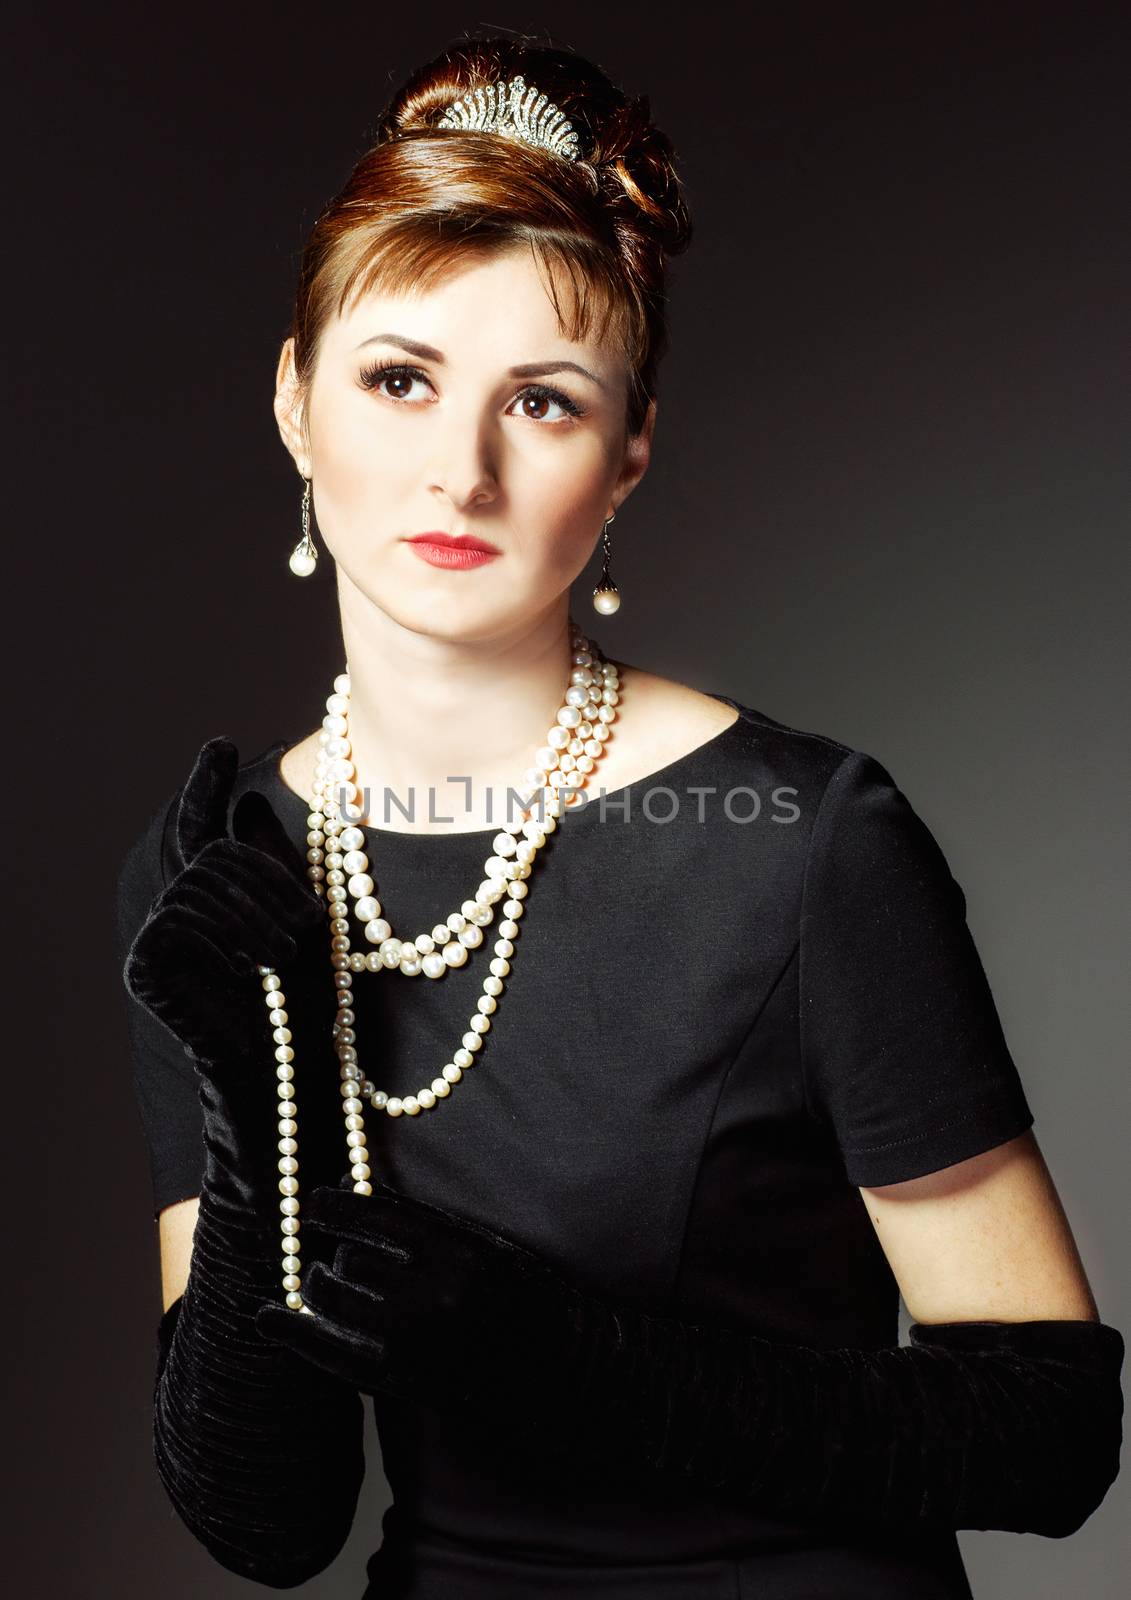 vintage Portrait of a beautiful young elegant woman. The girl in the image of Audrey Hepburn.